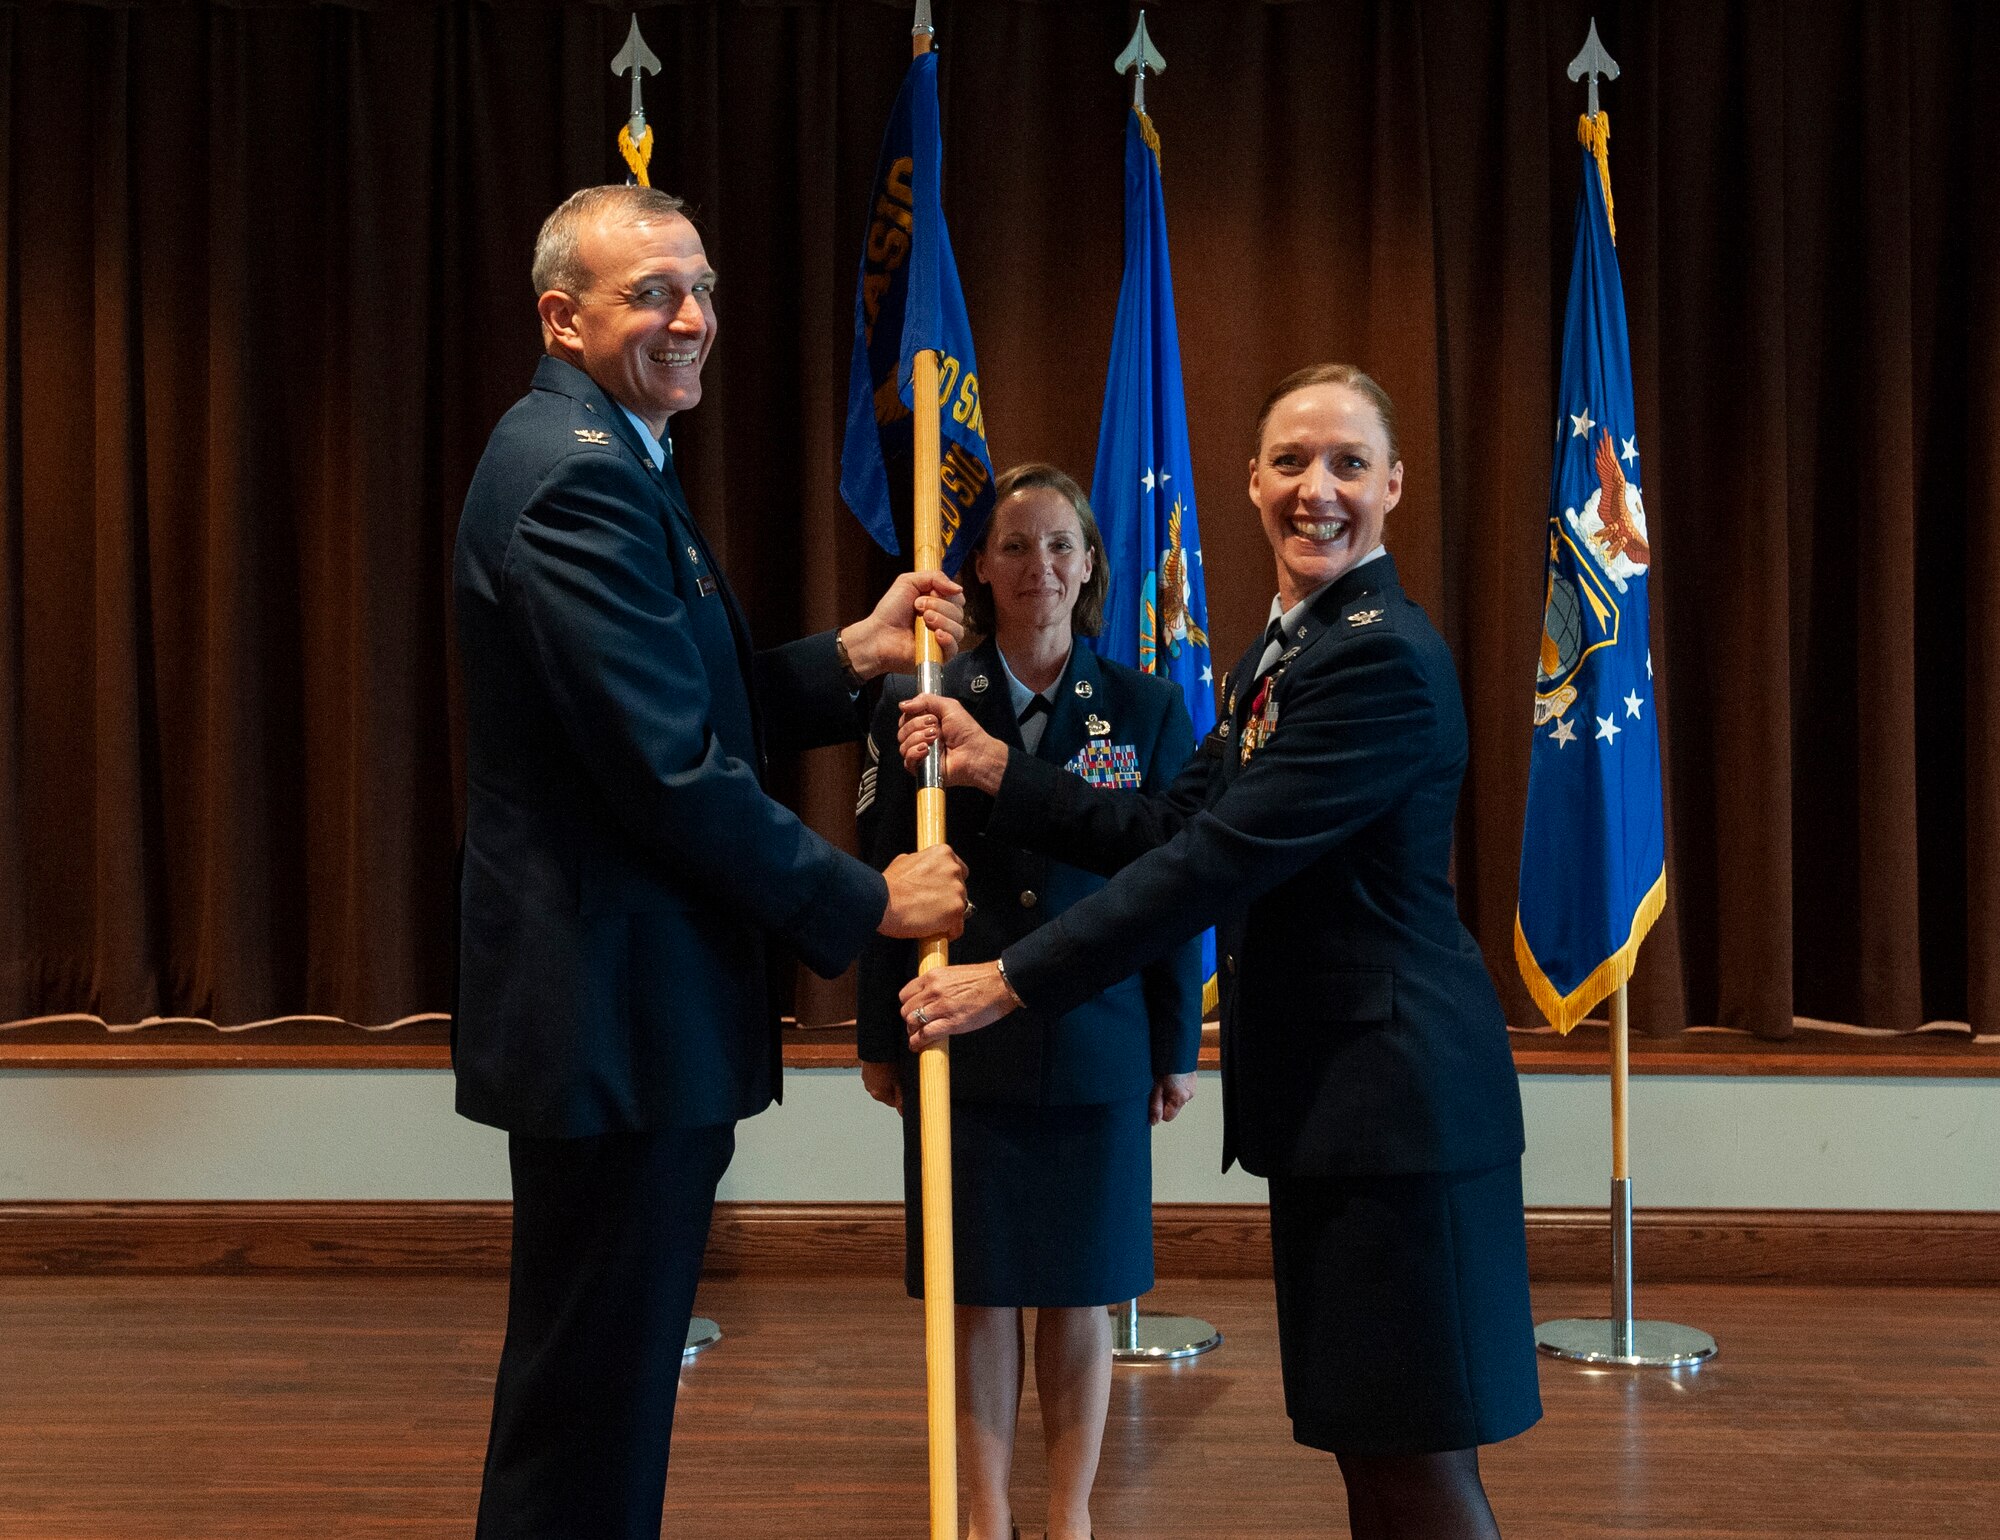 U.S. Air Force Col. Mary-Kathryn Haddad relinquishes command of the Geospatial and Signatures Intelligence Group, National Air and Space Intelligence Center, Wright-Patterson Air Force Base, Ohio, July 15, 2021. The Geospatial and Signatures Intelligence Group’s mission is to create geospatial and signatures intelligence and innovate advanced capabilities to characterize objects, activities, and events to deliver decision advantage for the Air Force and the Nation.